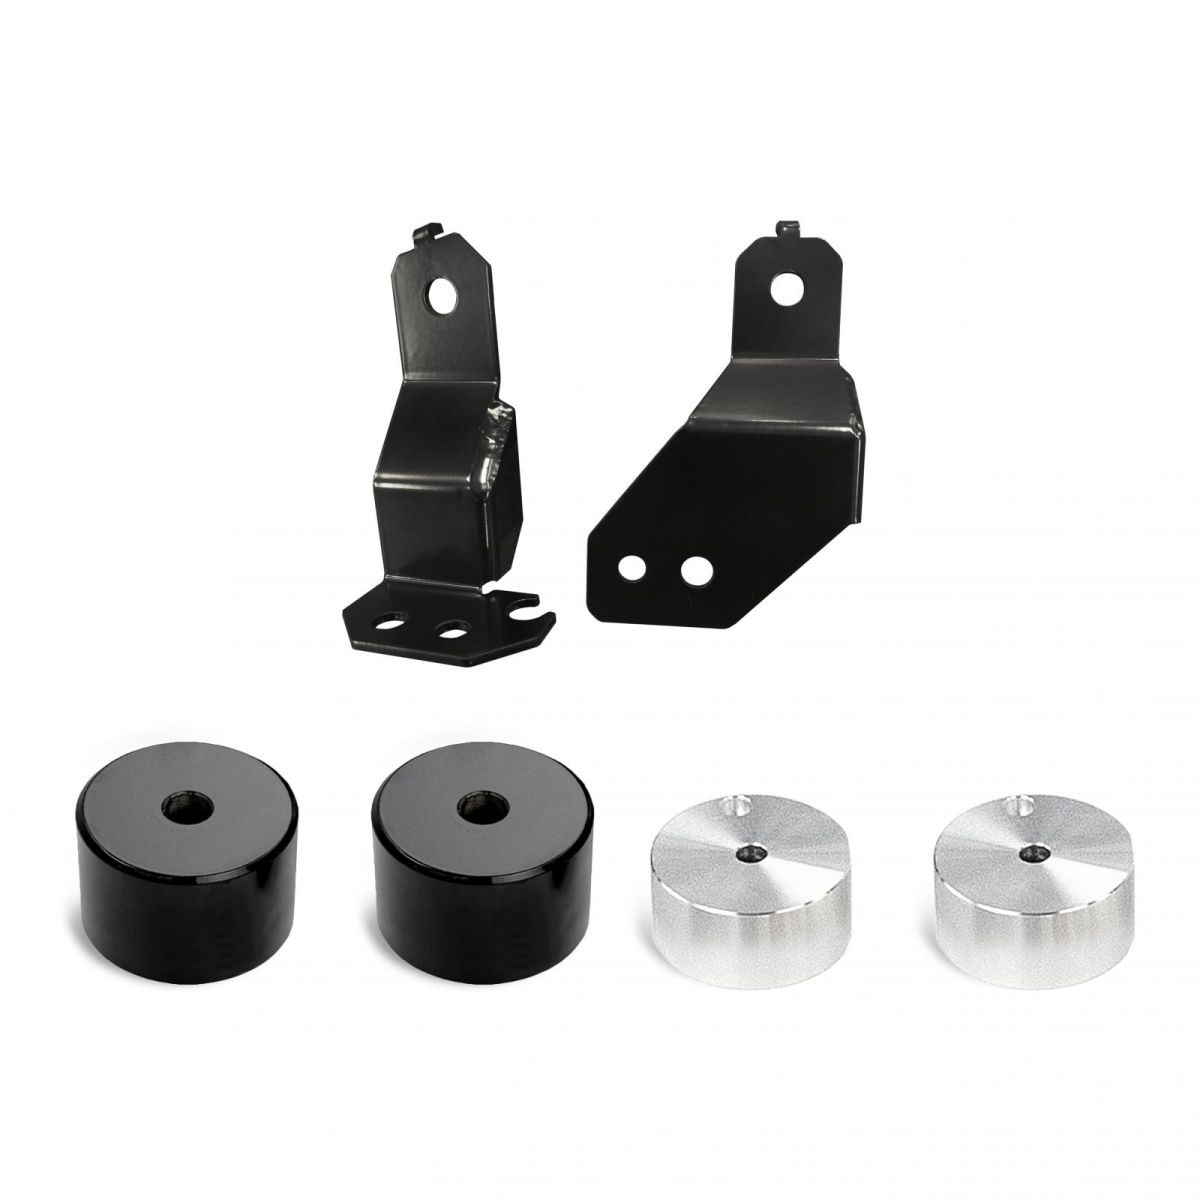 Cognito Motorsports Truck - Cognito Motorsports Truck 2-Inch Economy Leveling Kit for 17-19 Ford F250/F350 4WD Trucks 120-90692